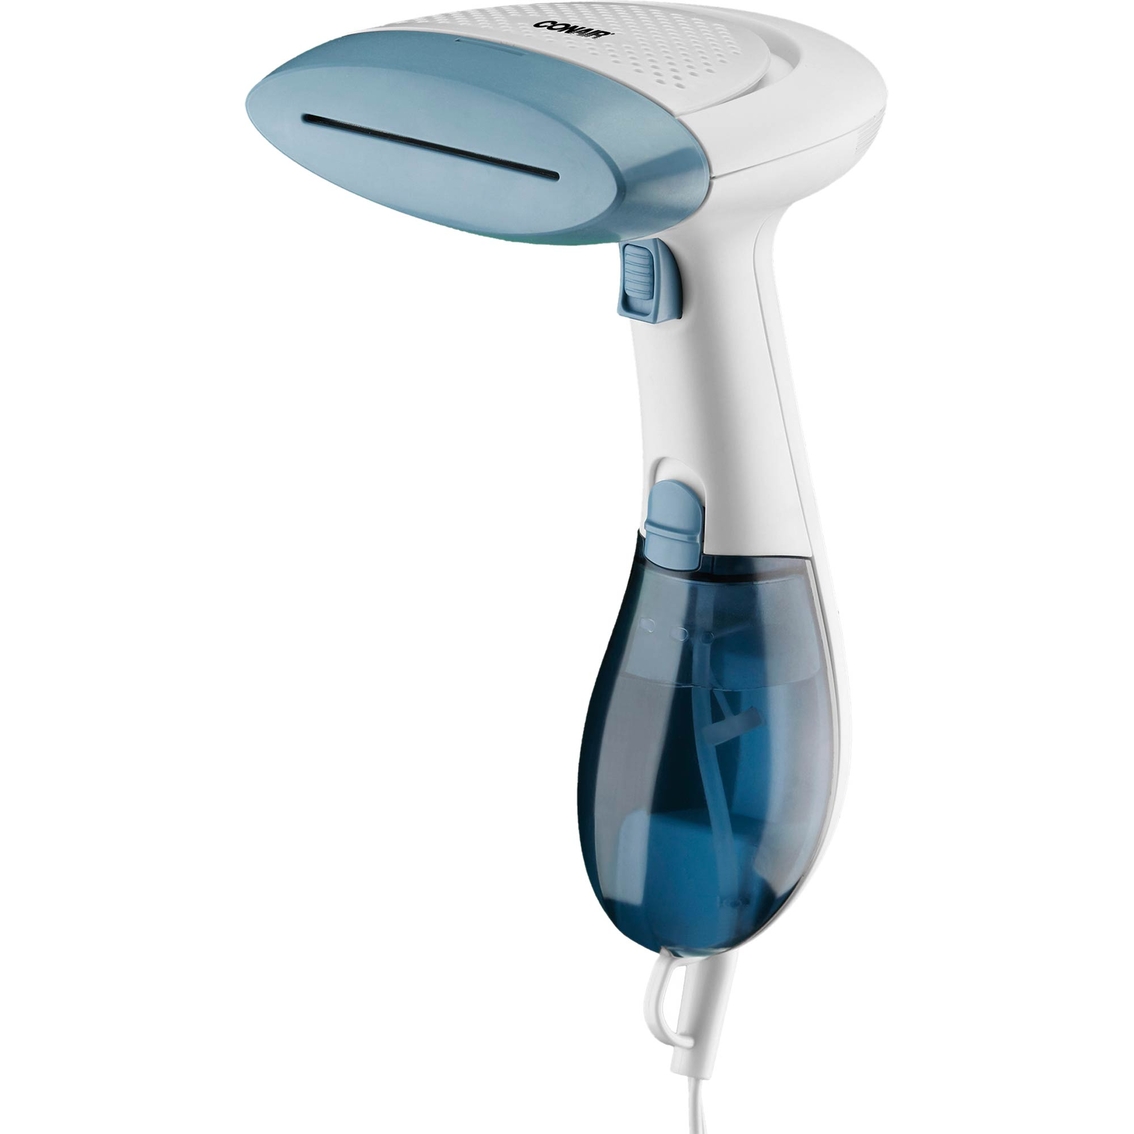 Conair ExtremeSteam Handheld Fabric Steamer - Image 2 of 3